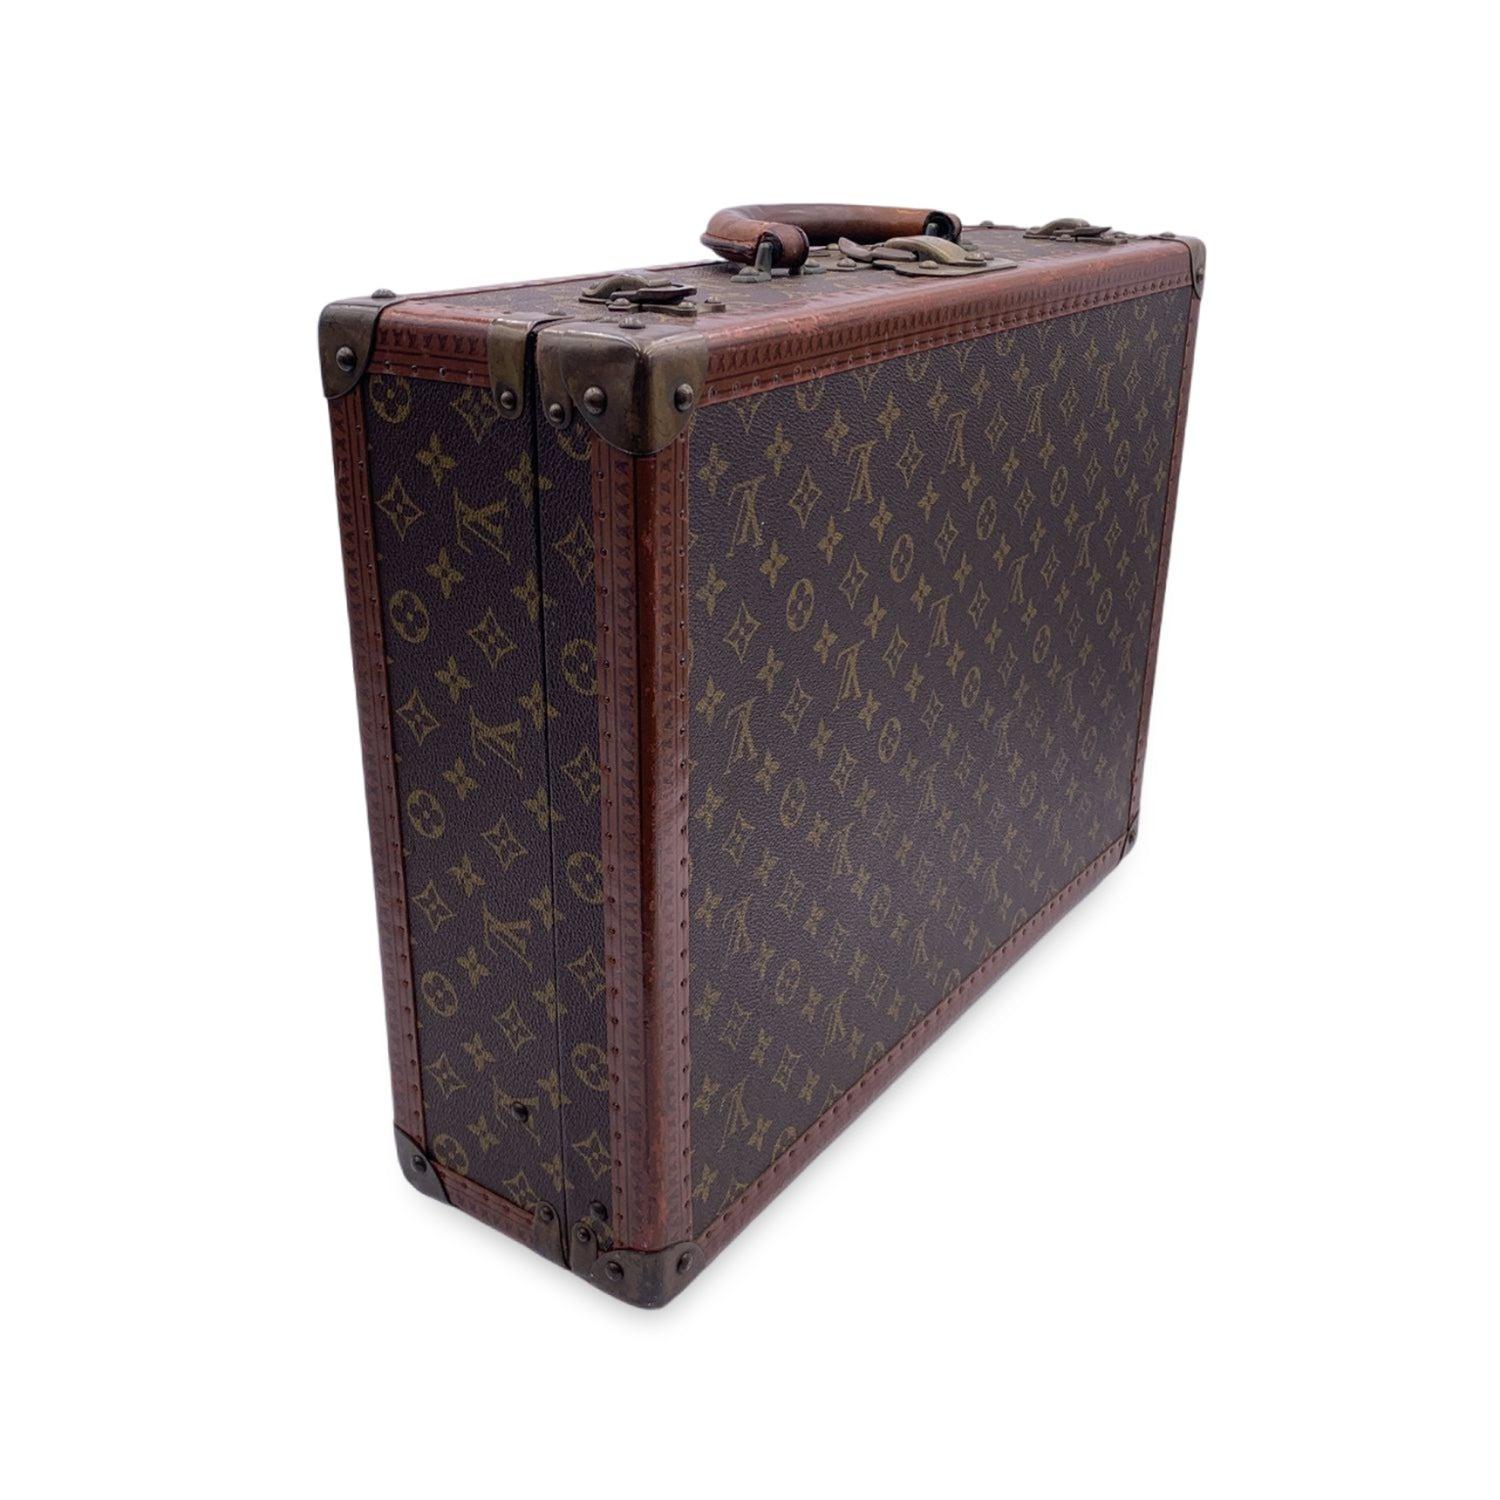 LOUIS VUITTON vintage Monogram Cotteville 50 Suitcase, mod. M21422. A part of Louis Vuitton history, ideal for travel or for home or office decor. Monogram canvas. LV monograms embossed on trim. Rounded leather handle. Canvas interior. Louis Vuitton